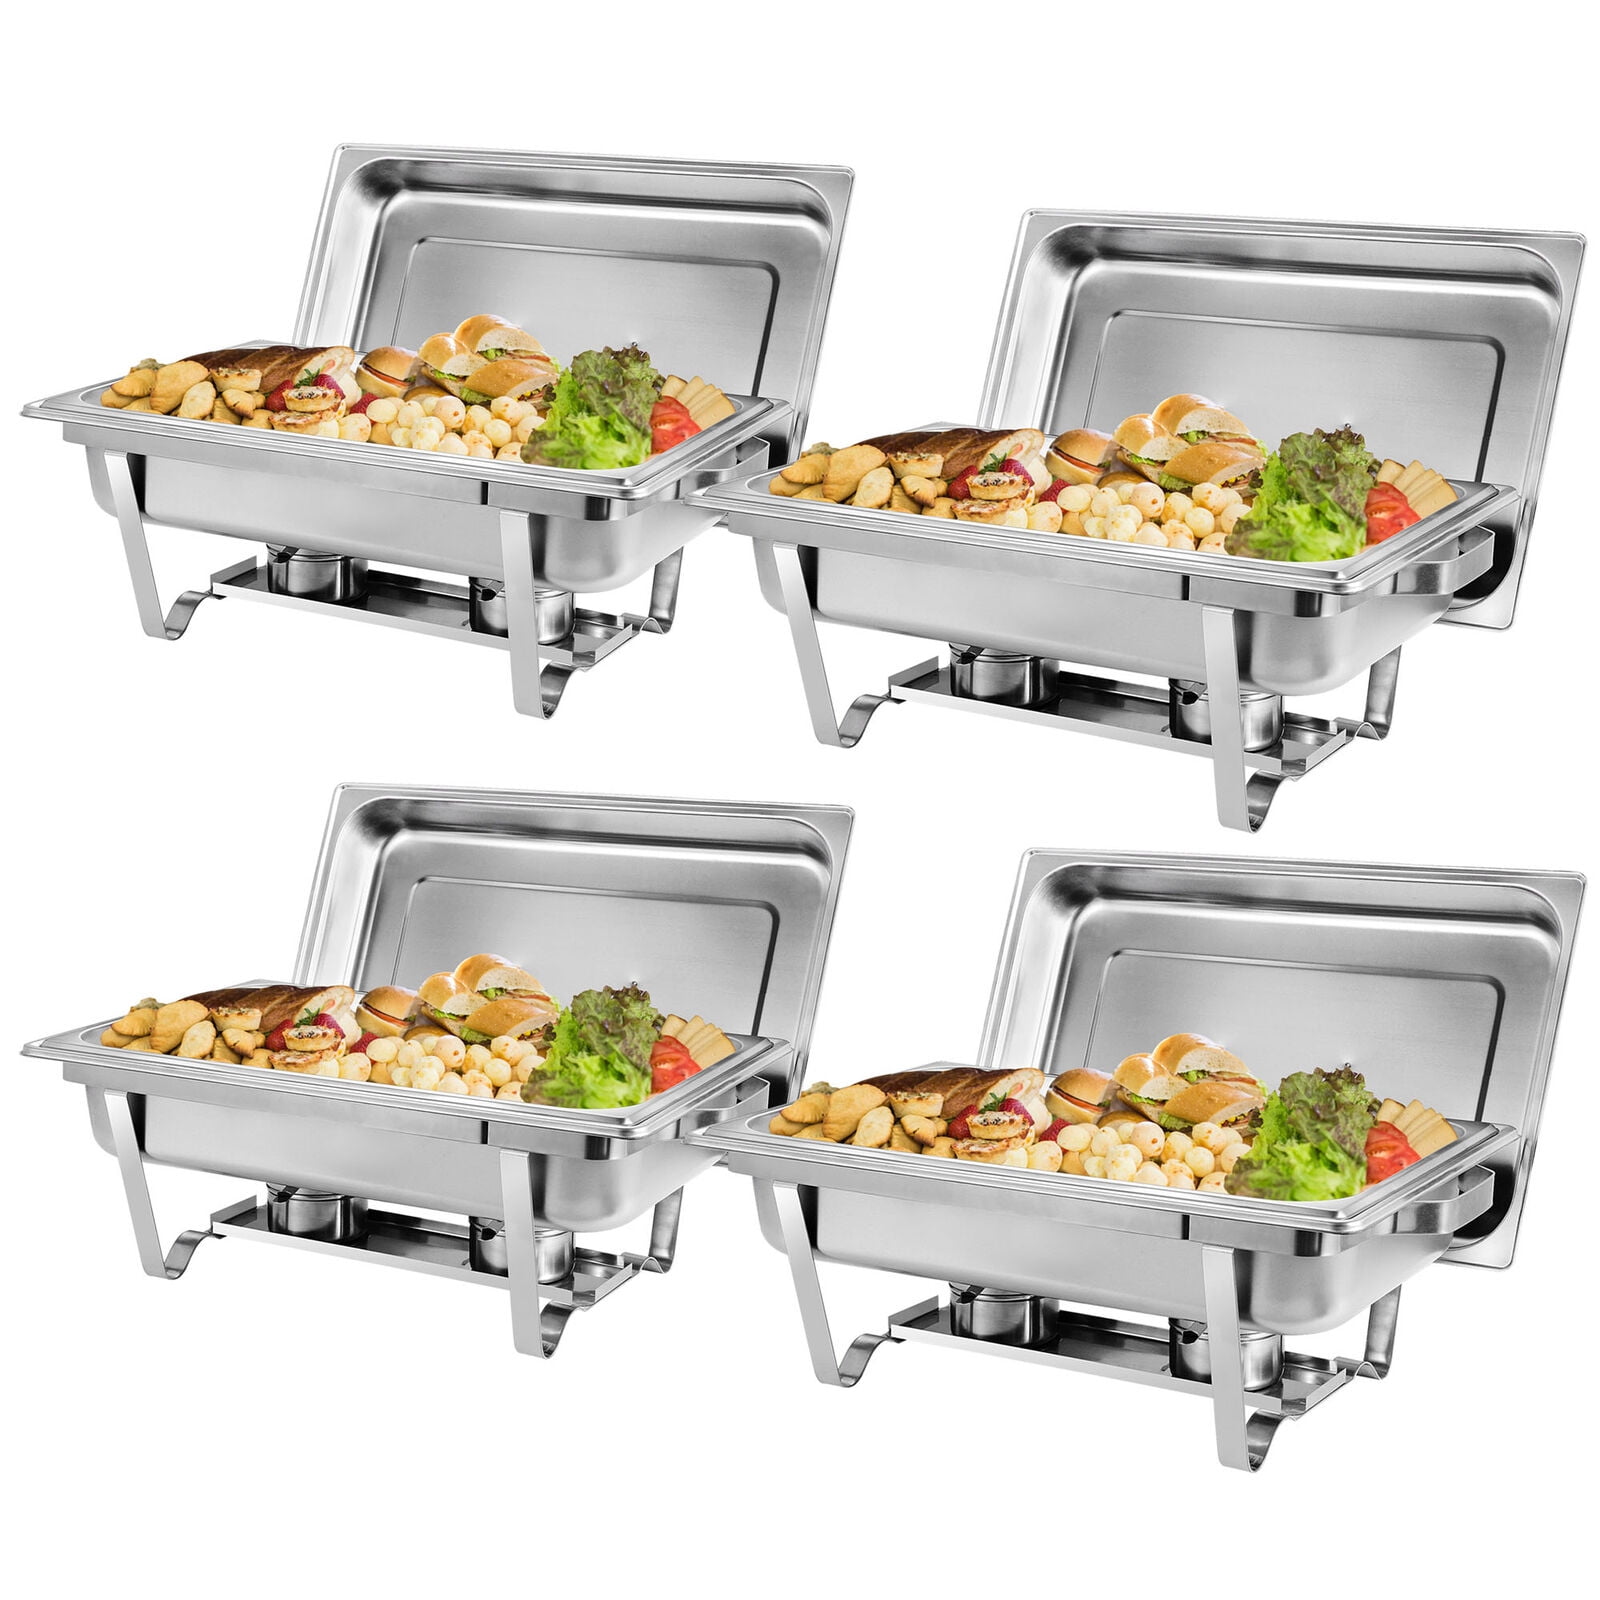 1 Pack Catering Stainless Steel Chafer Chafing Dish Sets 9.5QT For Hotel Party 